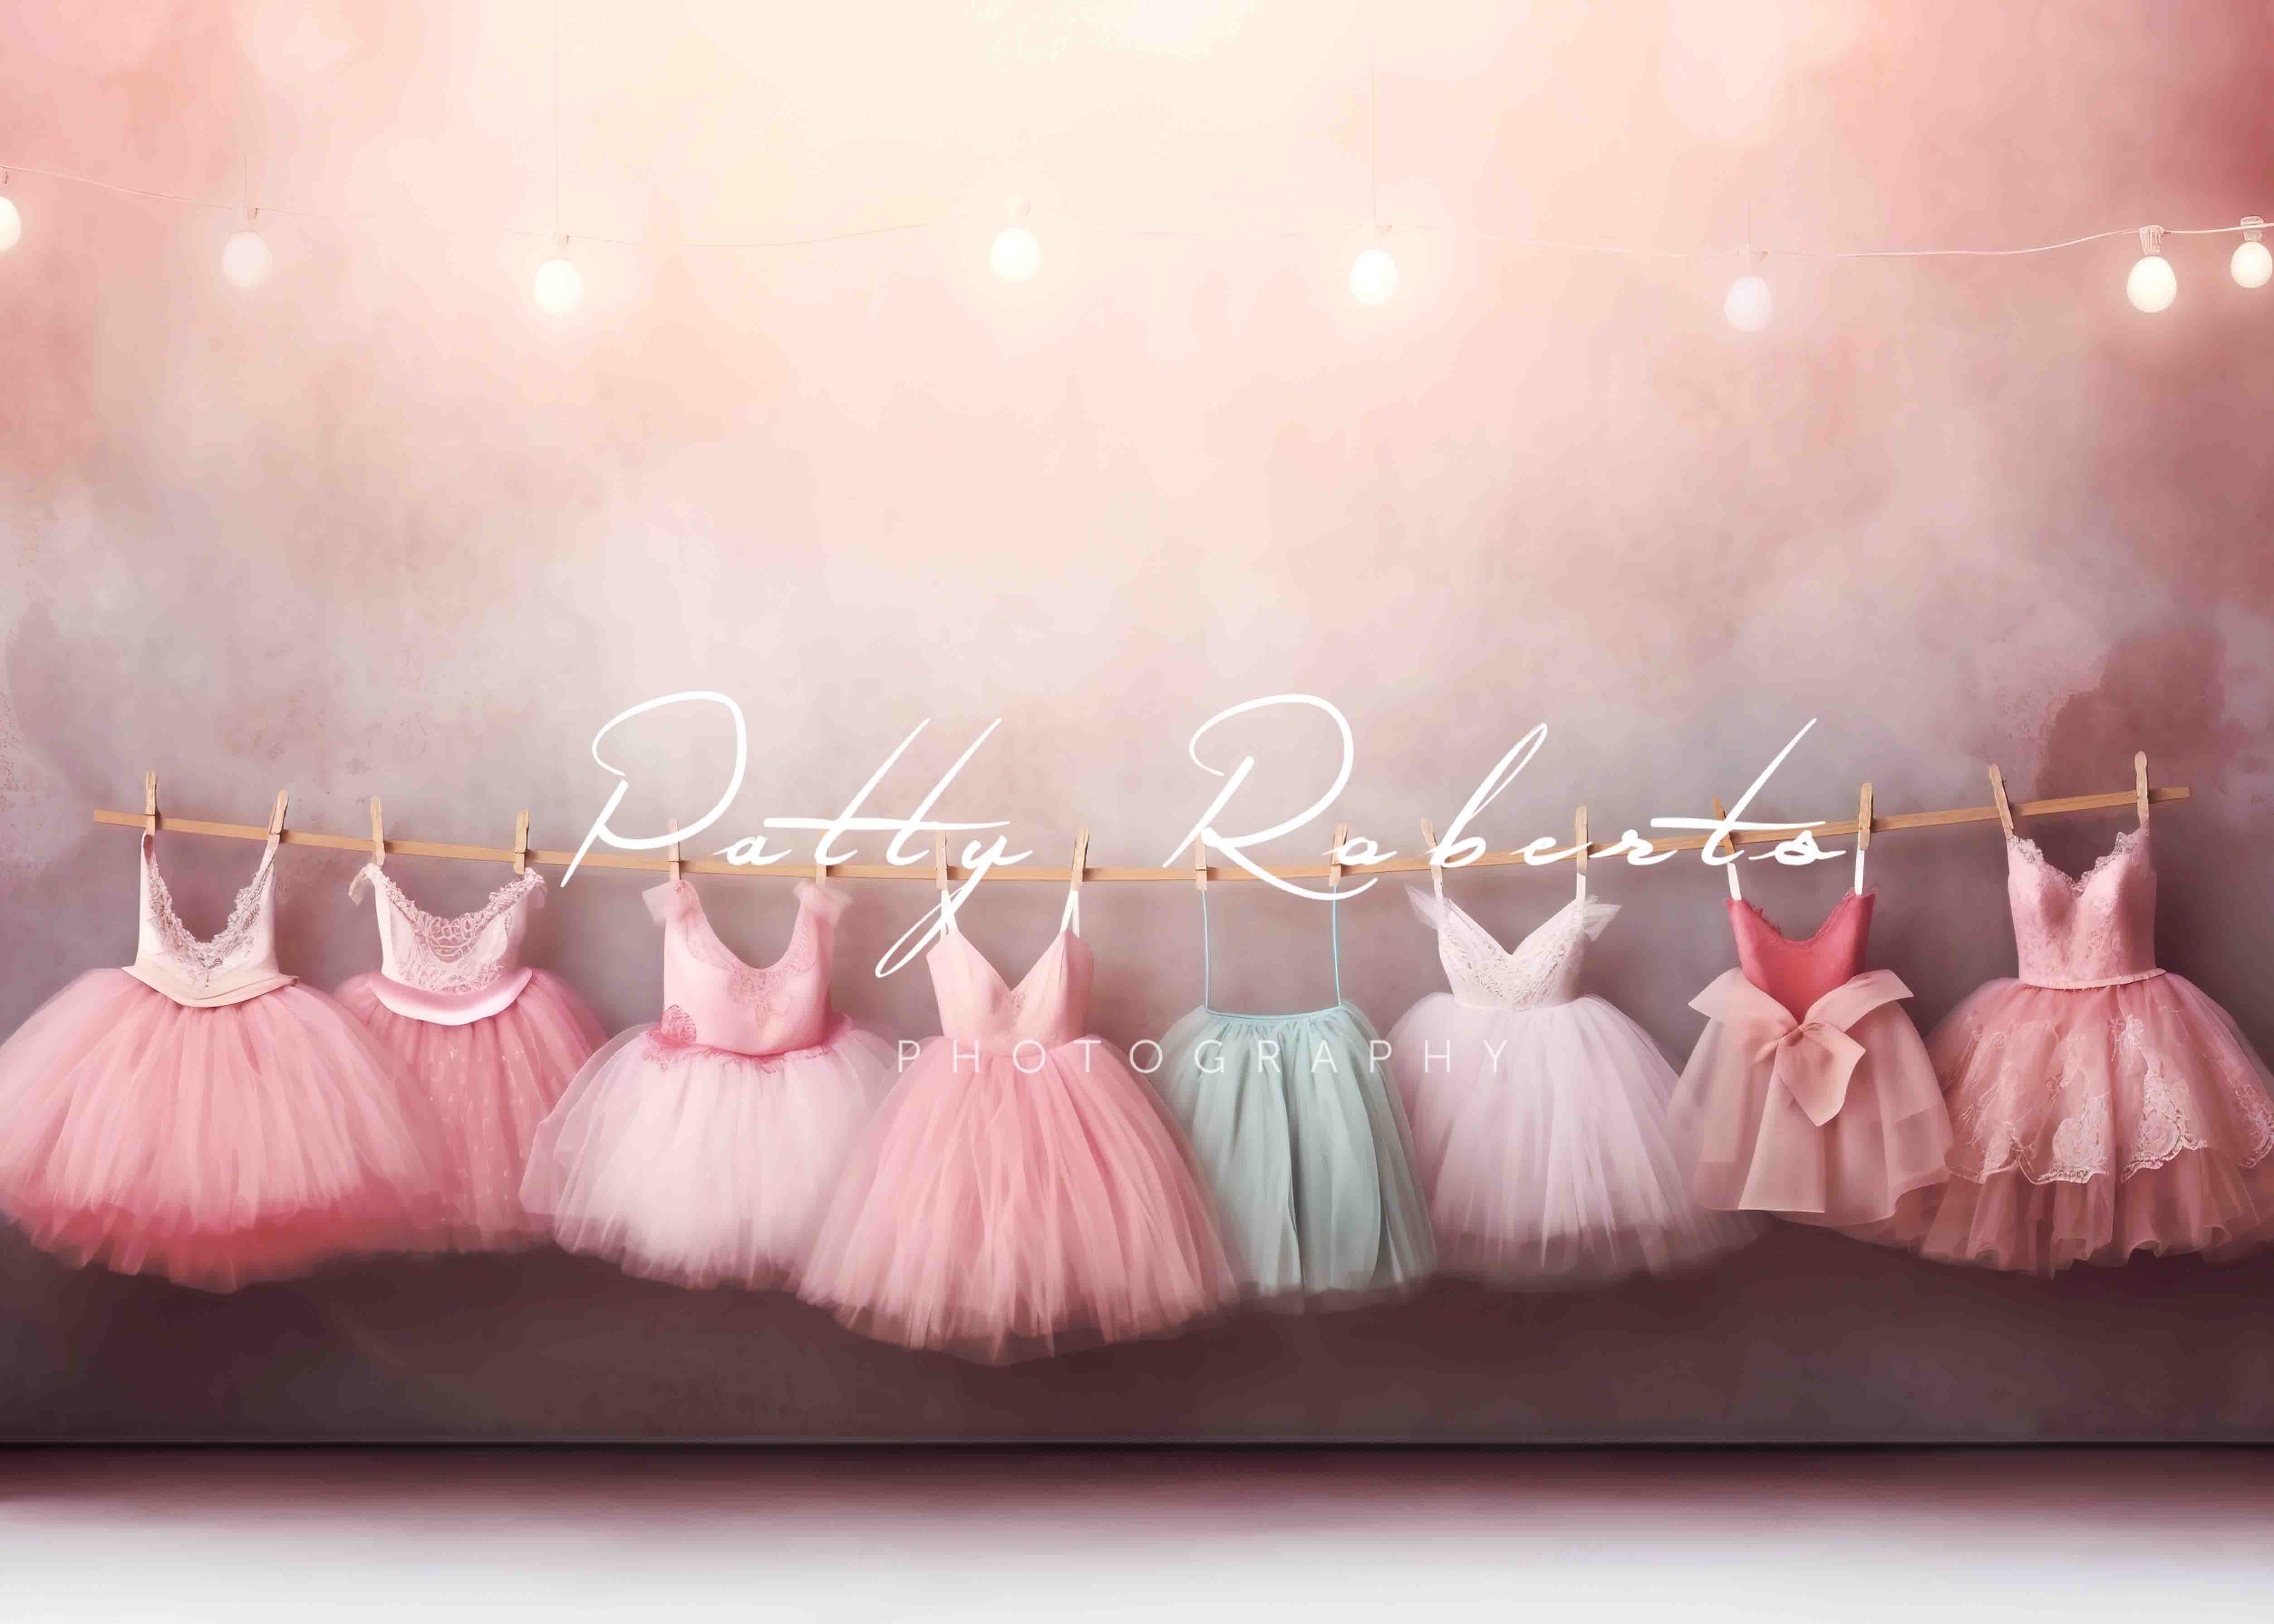 Kate Ballet Class Dresses Backdrop Designed by Patty Roberts